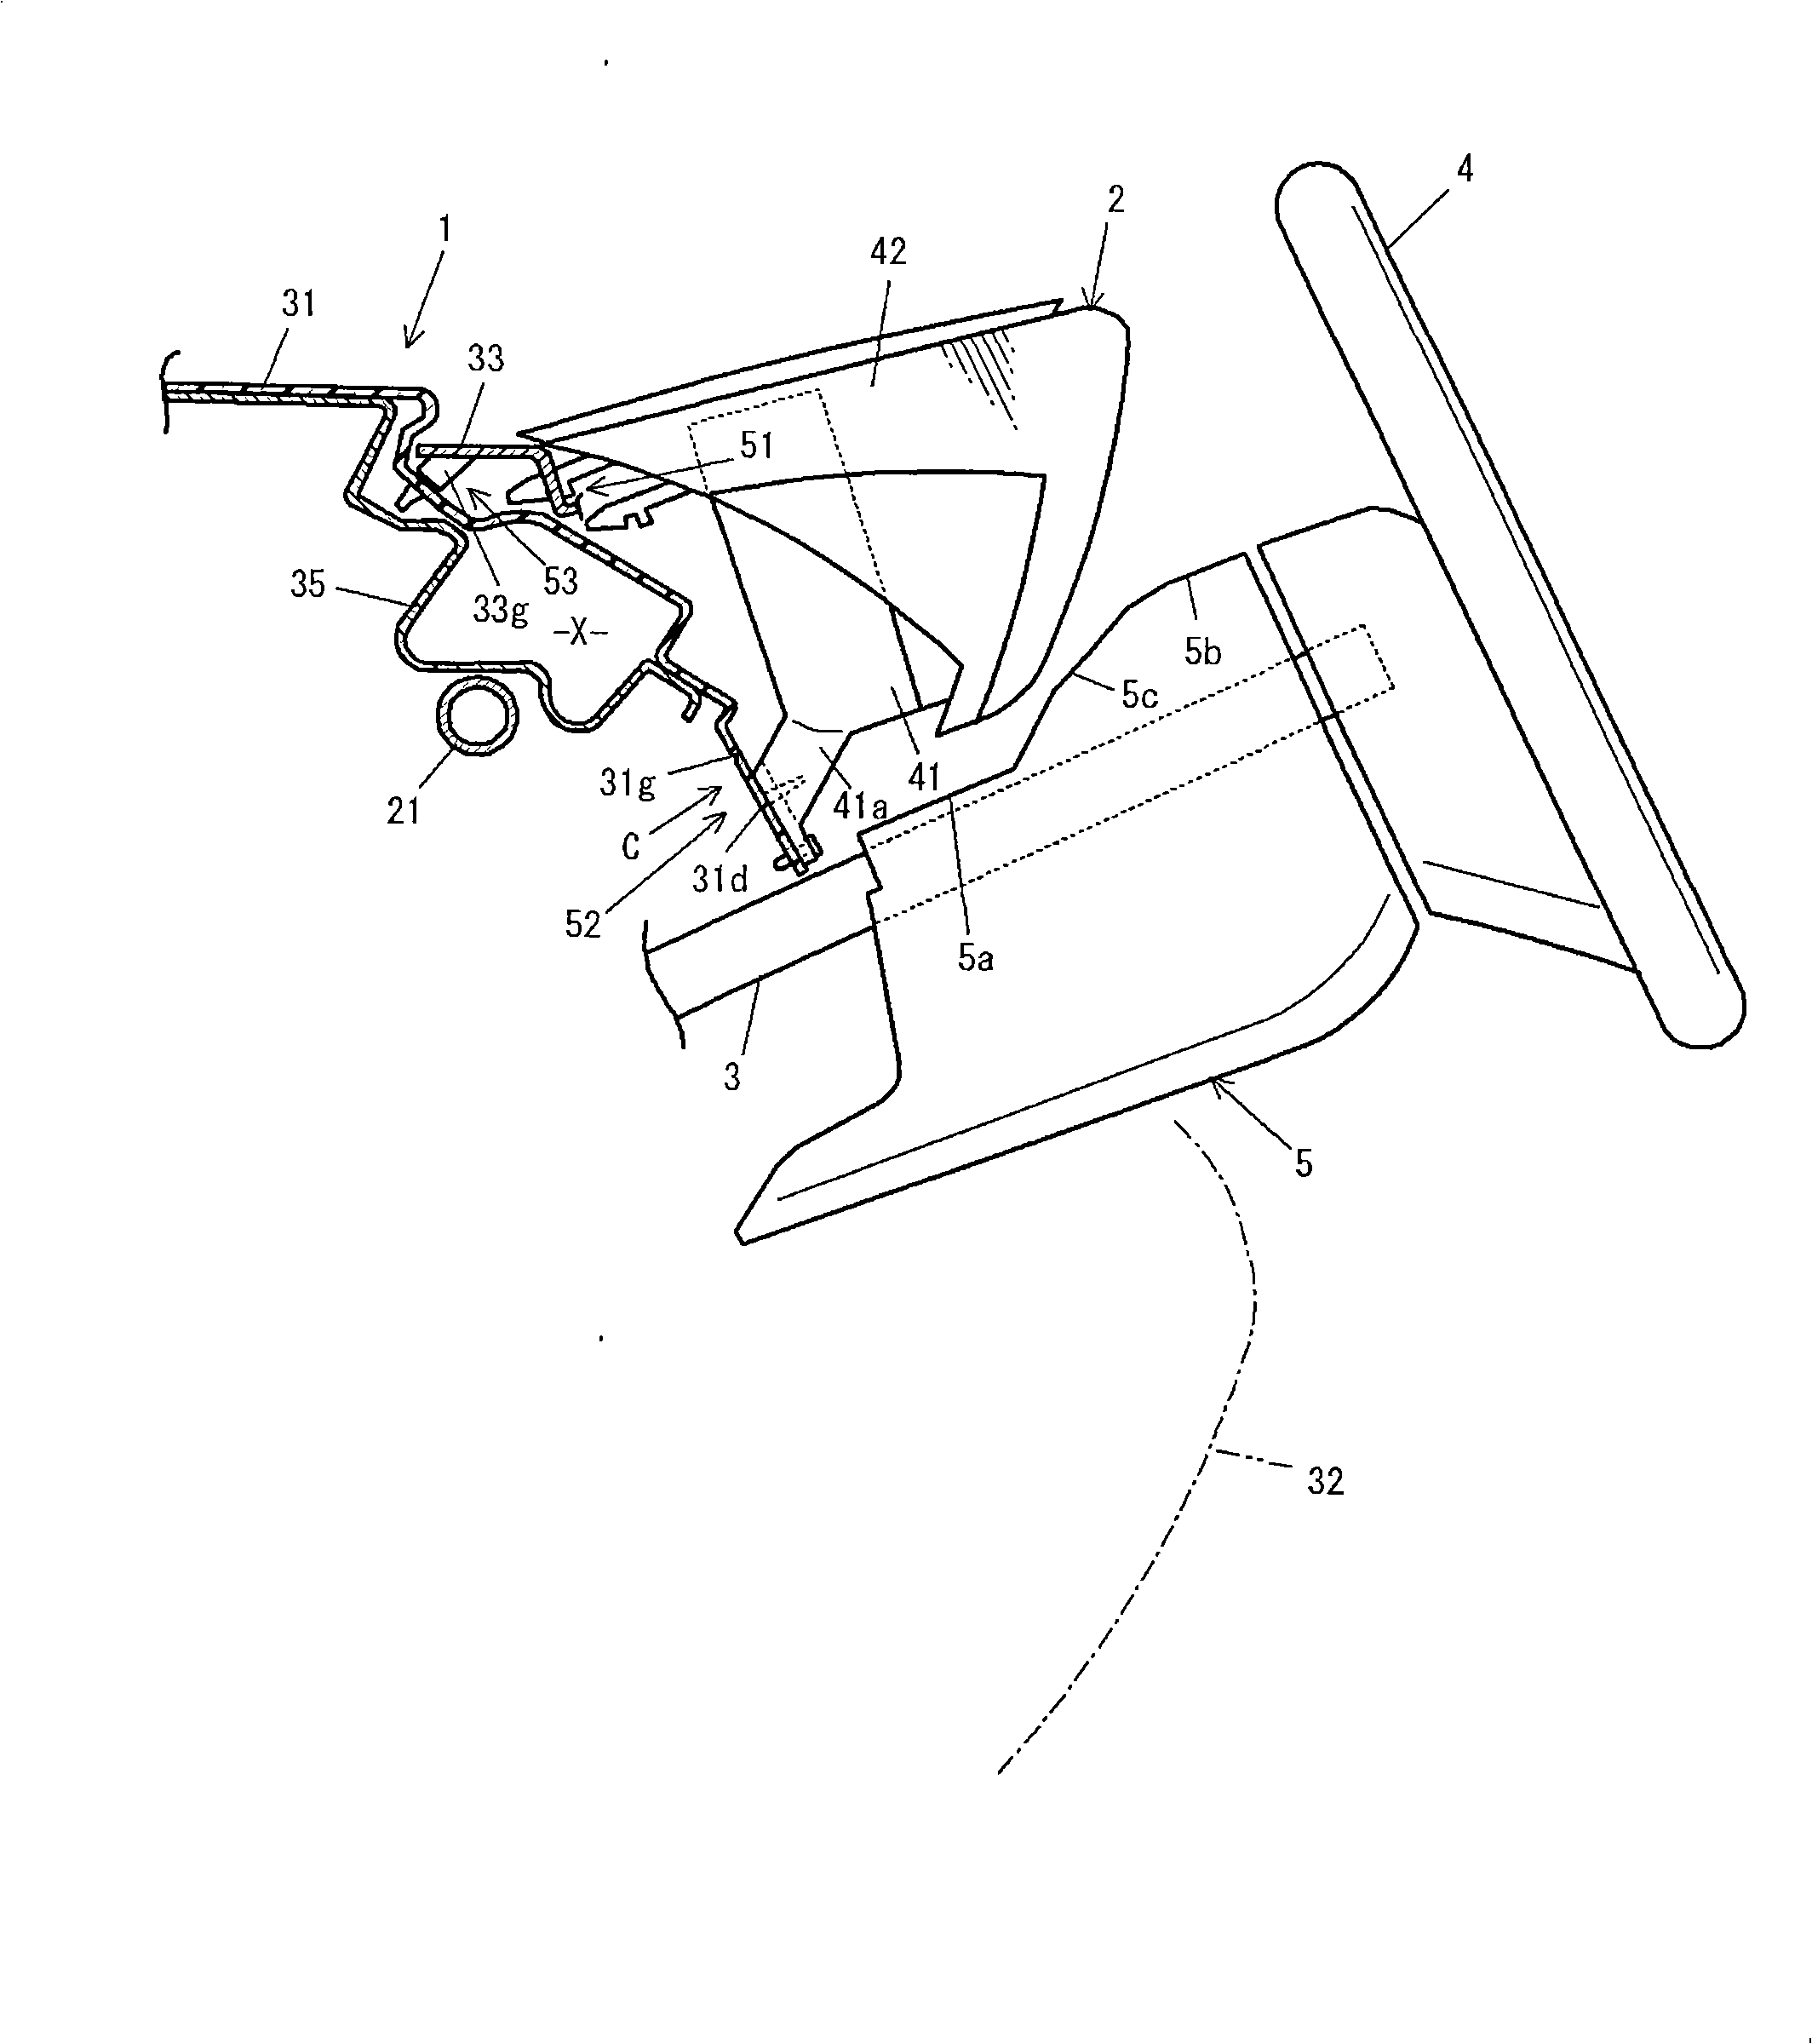 Structure of instrument panel area of vehicle